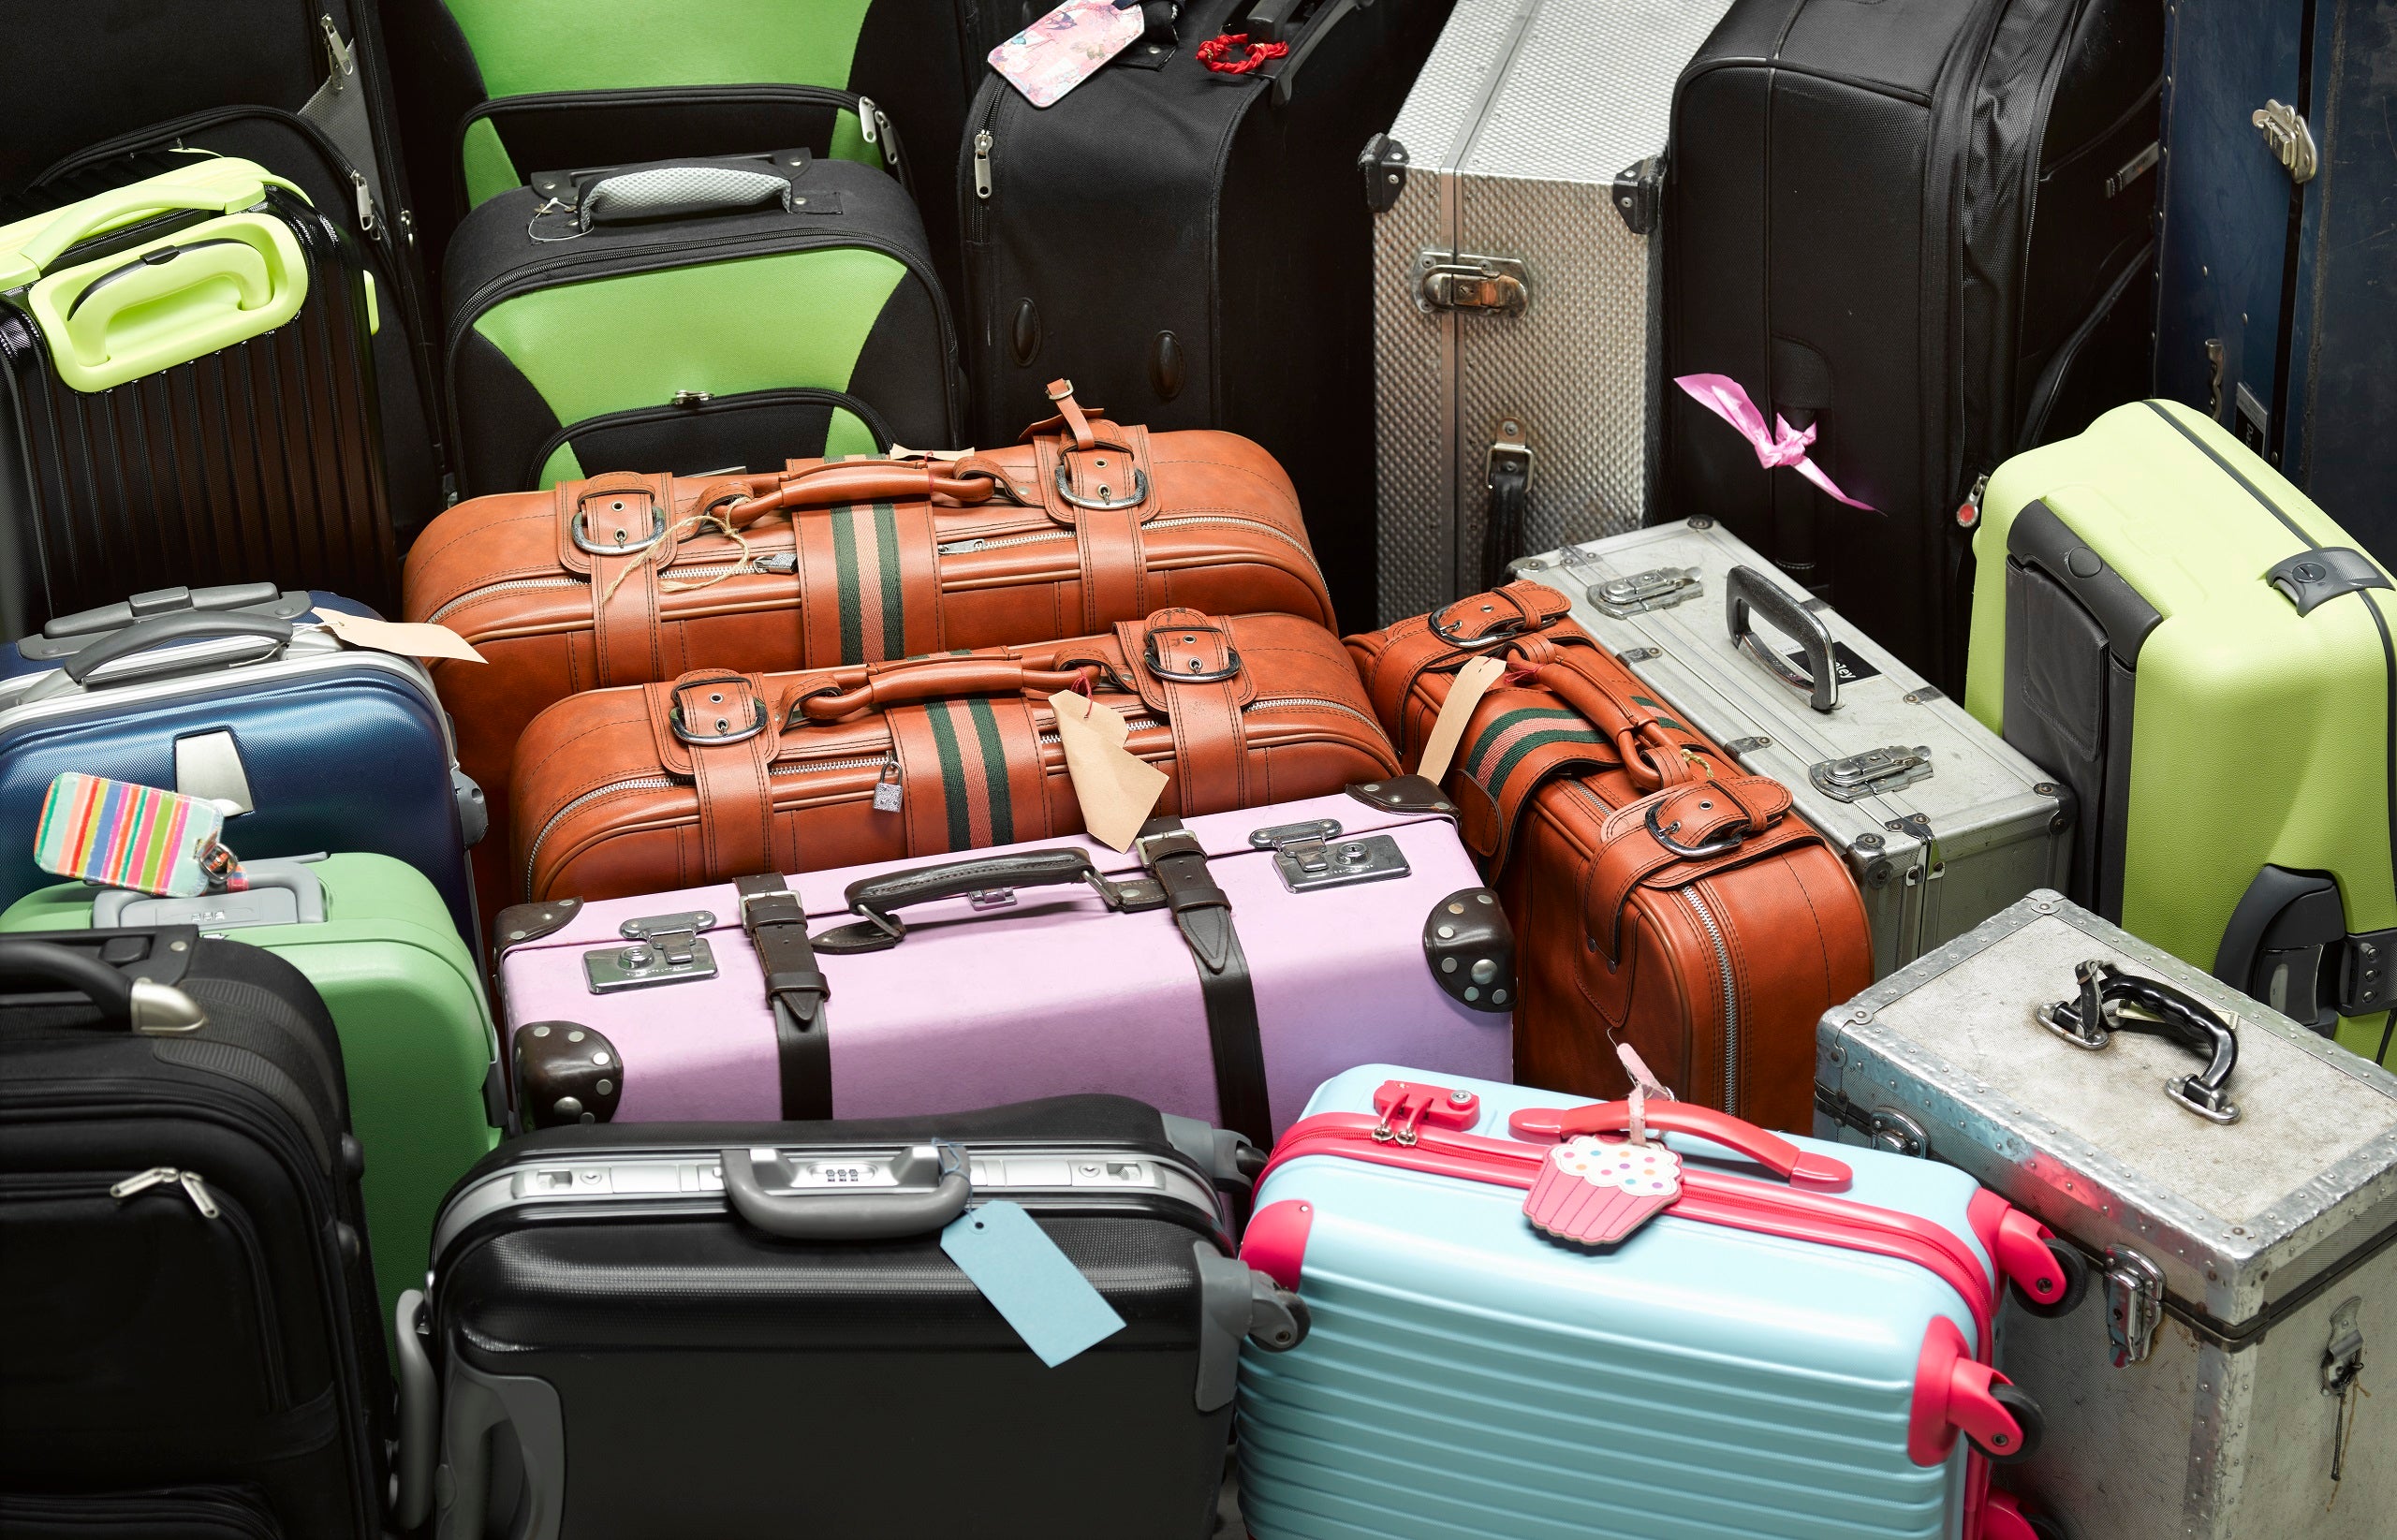 A group of colorful suitcases